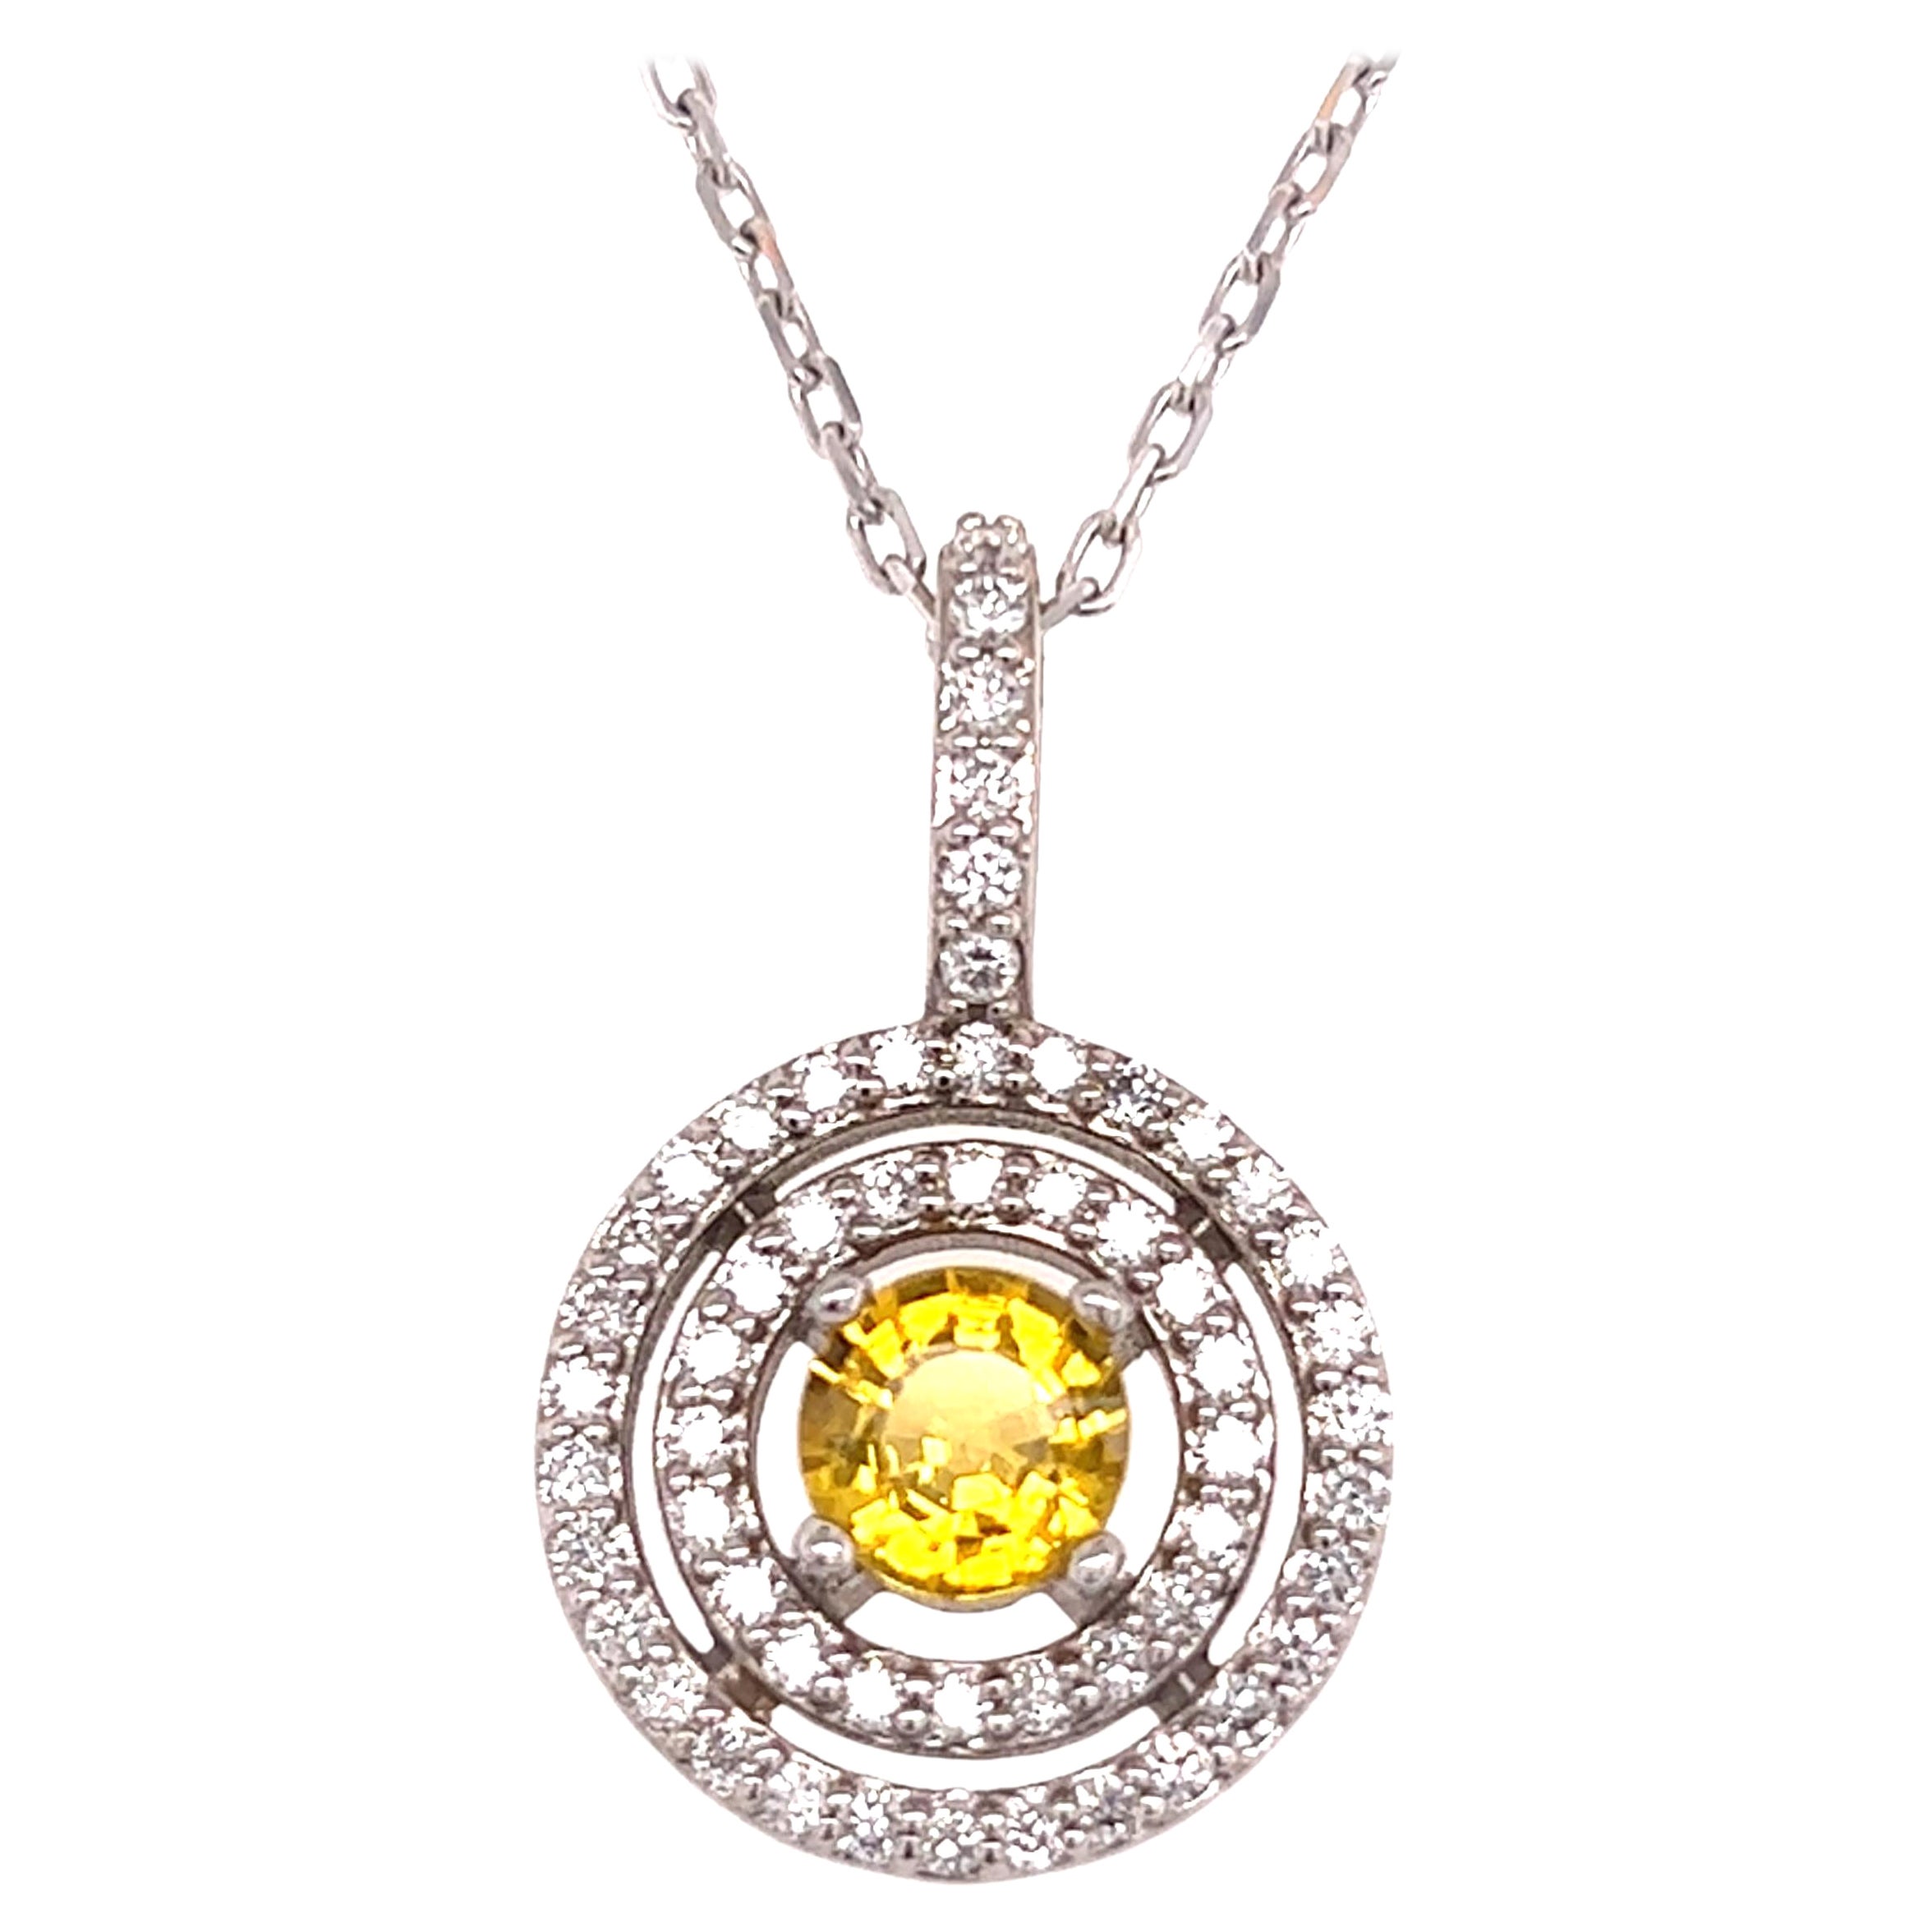 Natural Sapphire Diamond Necklace 14k Gold 1.51 TCW Certified